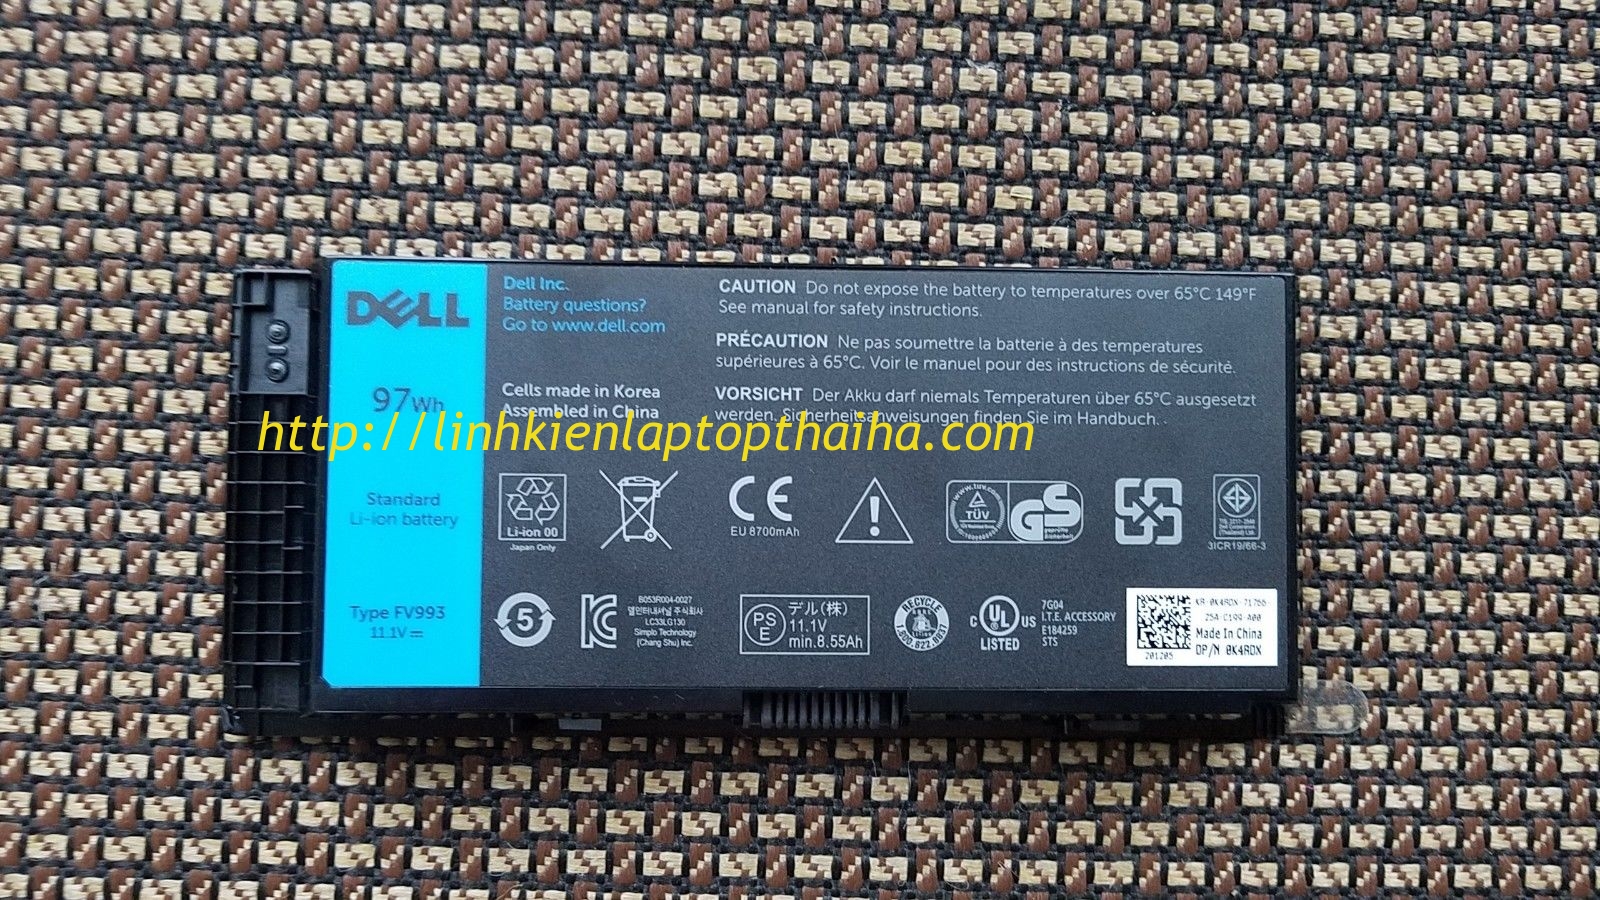 Pin laptop Dell M6800